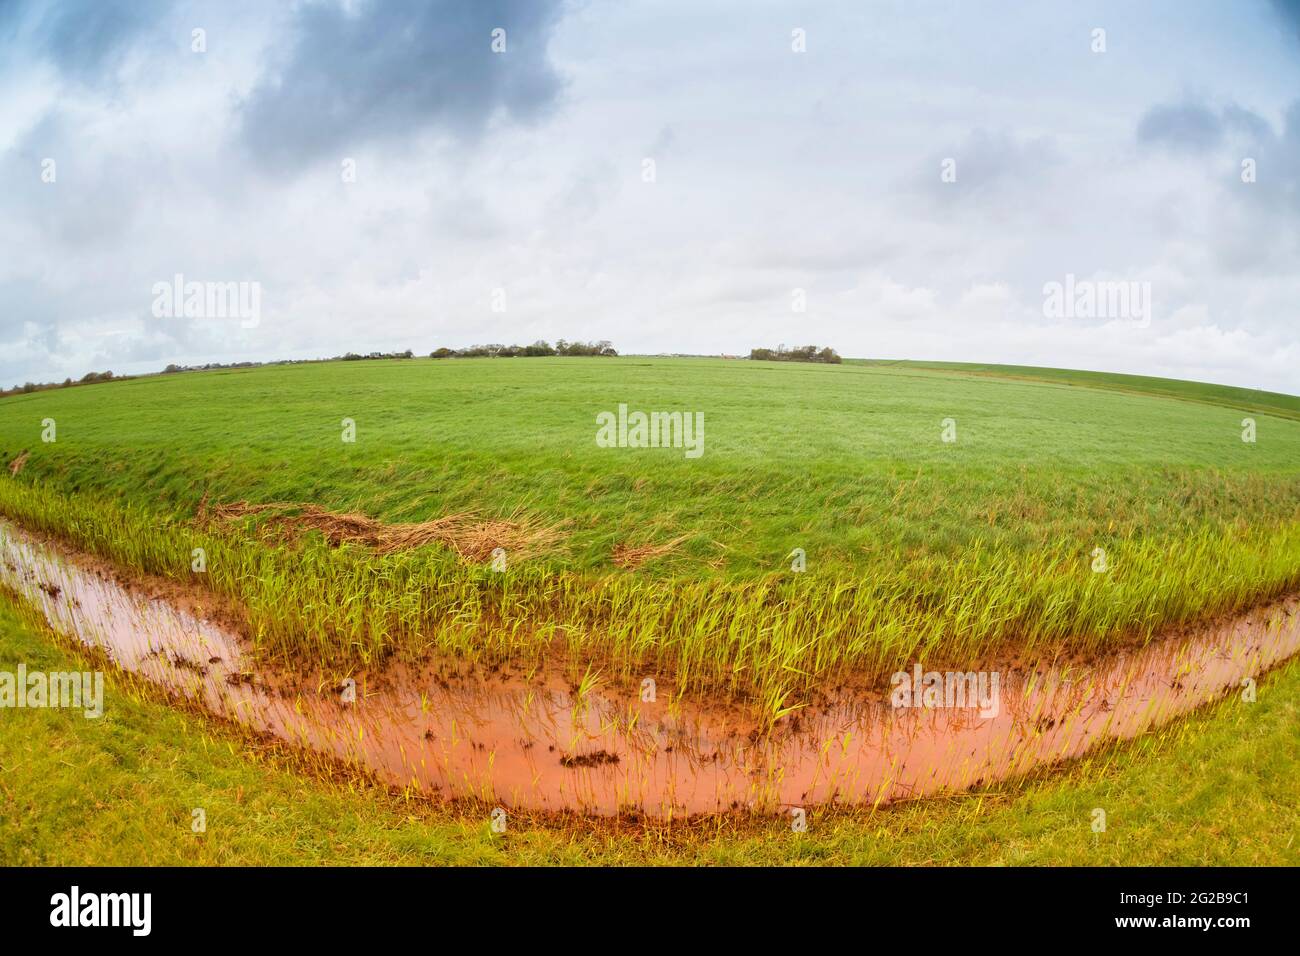 Typical farm agricultural landscape with fish eye effect, Texel, Netherlands Stock Photo